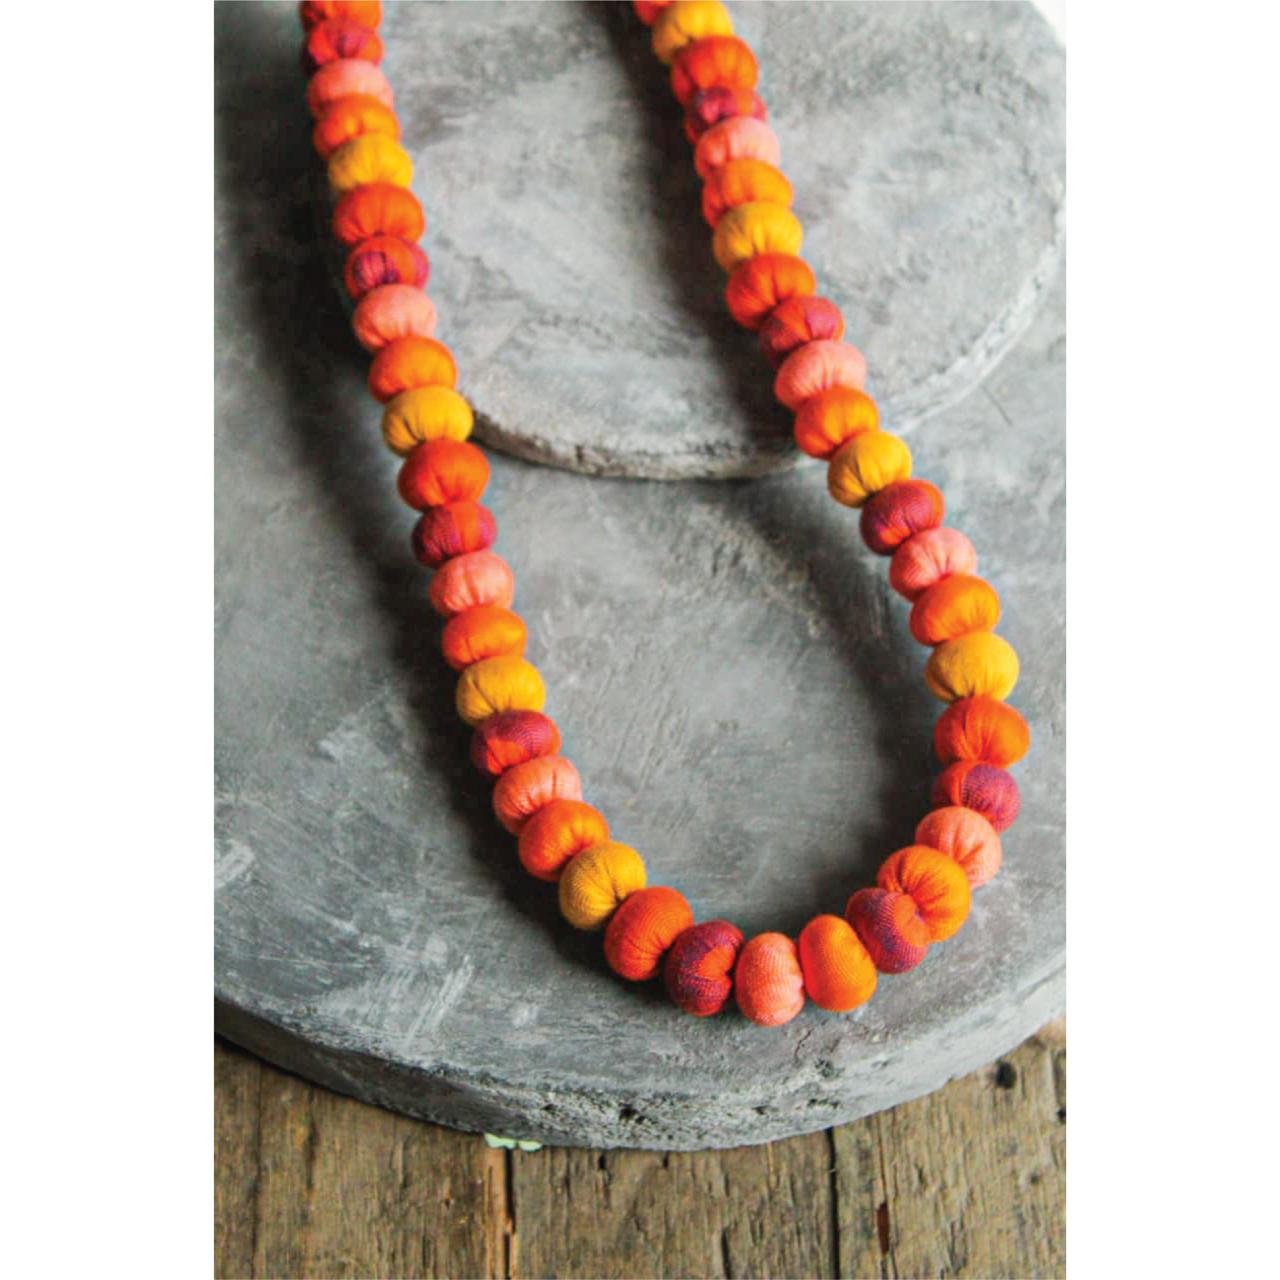 Necklace - Multi Color Round Beads - Handmade